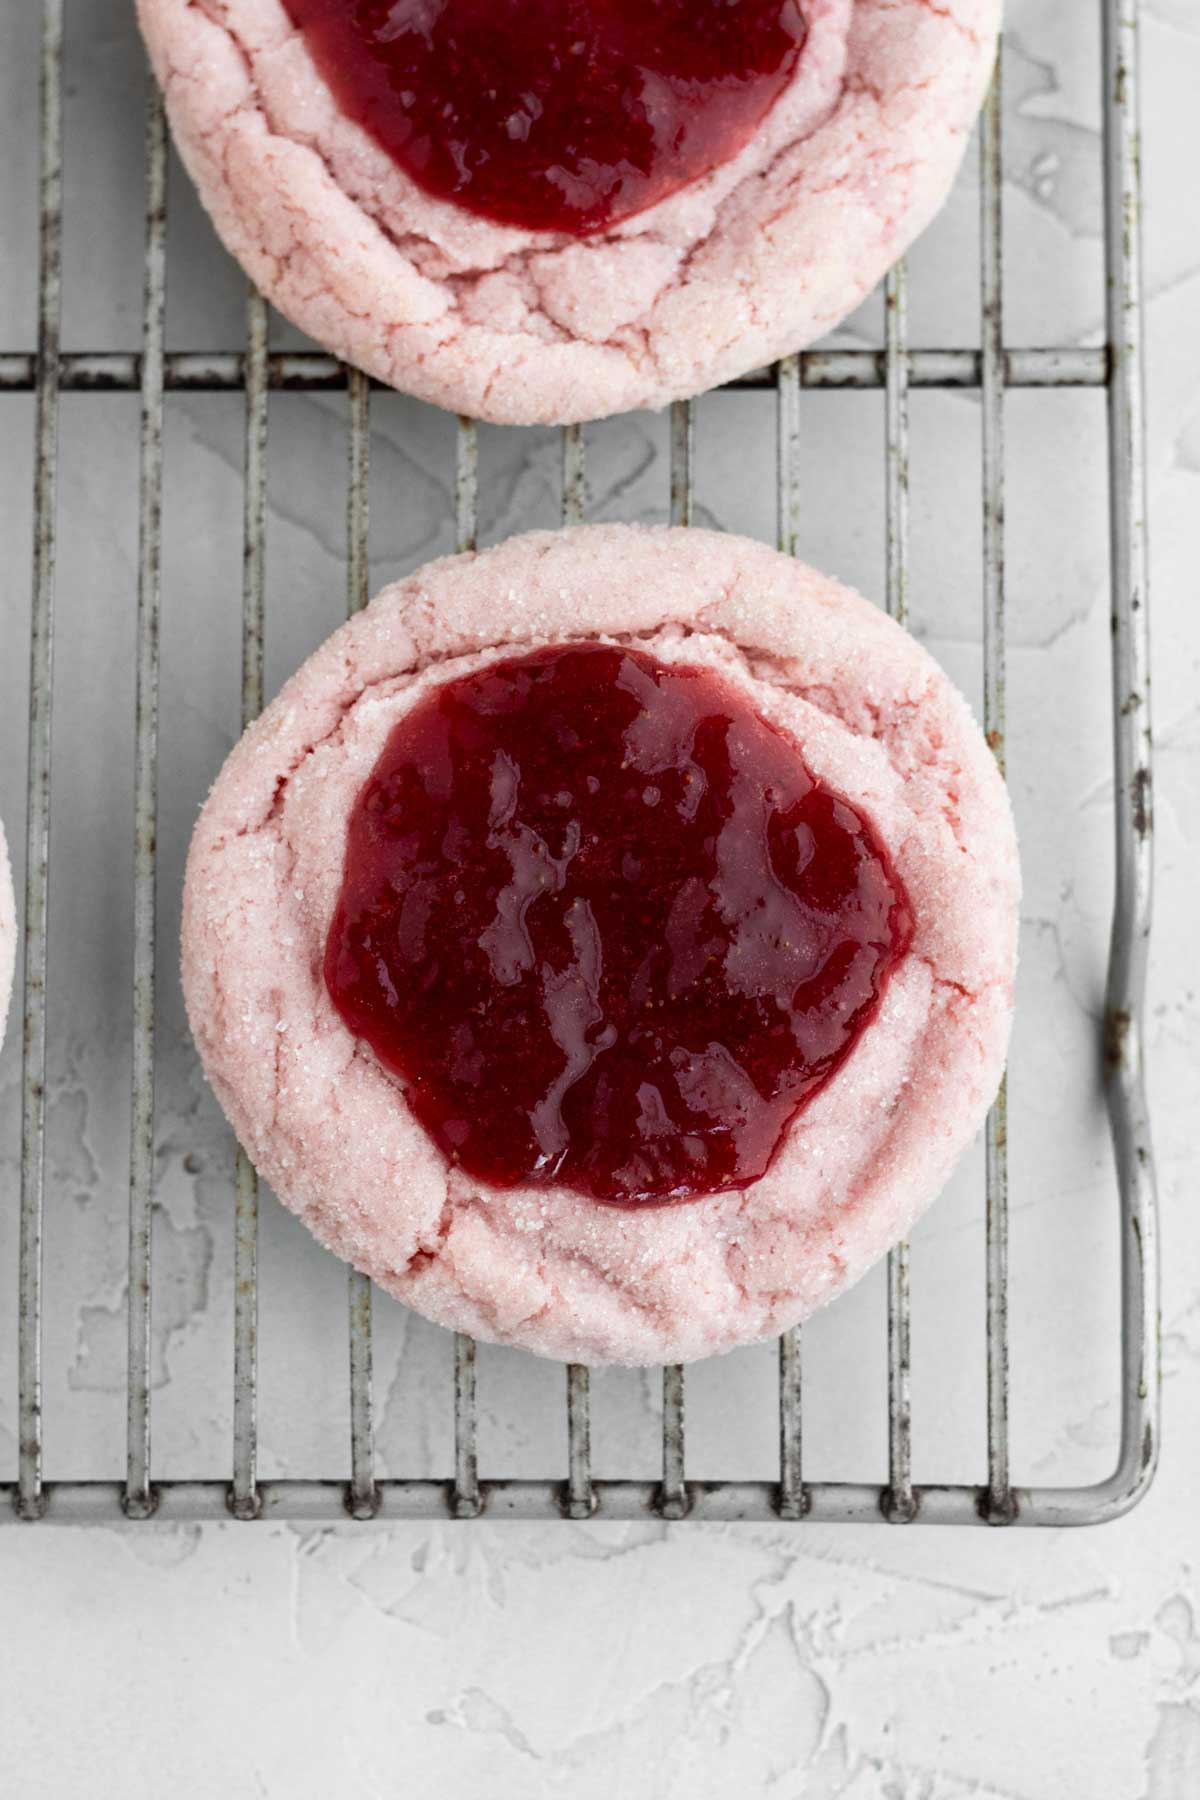 A round dollop of bright red strawberry jam is placed in the center of the cookie.